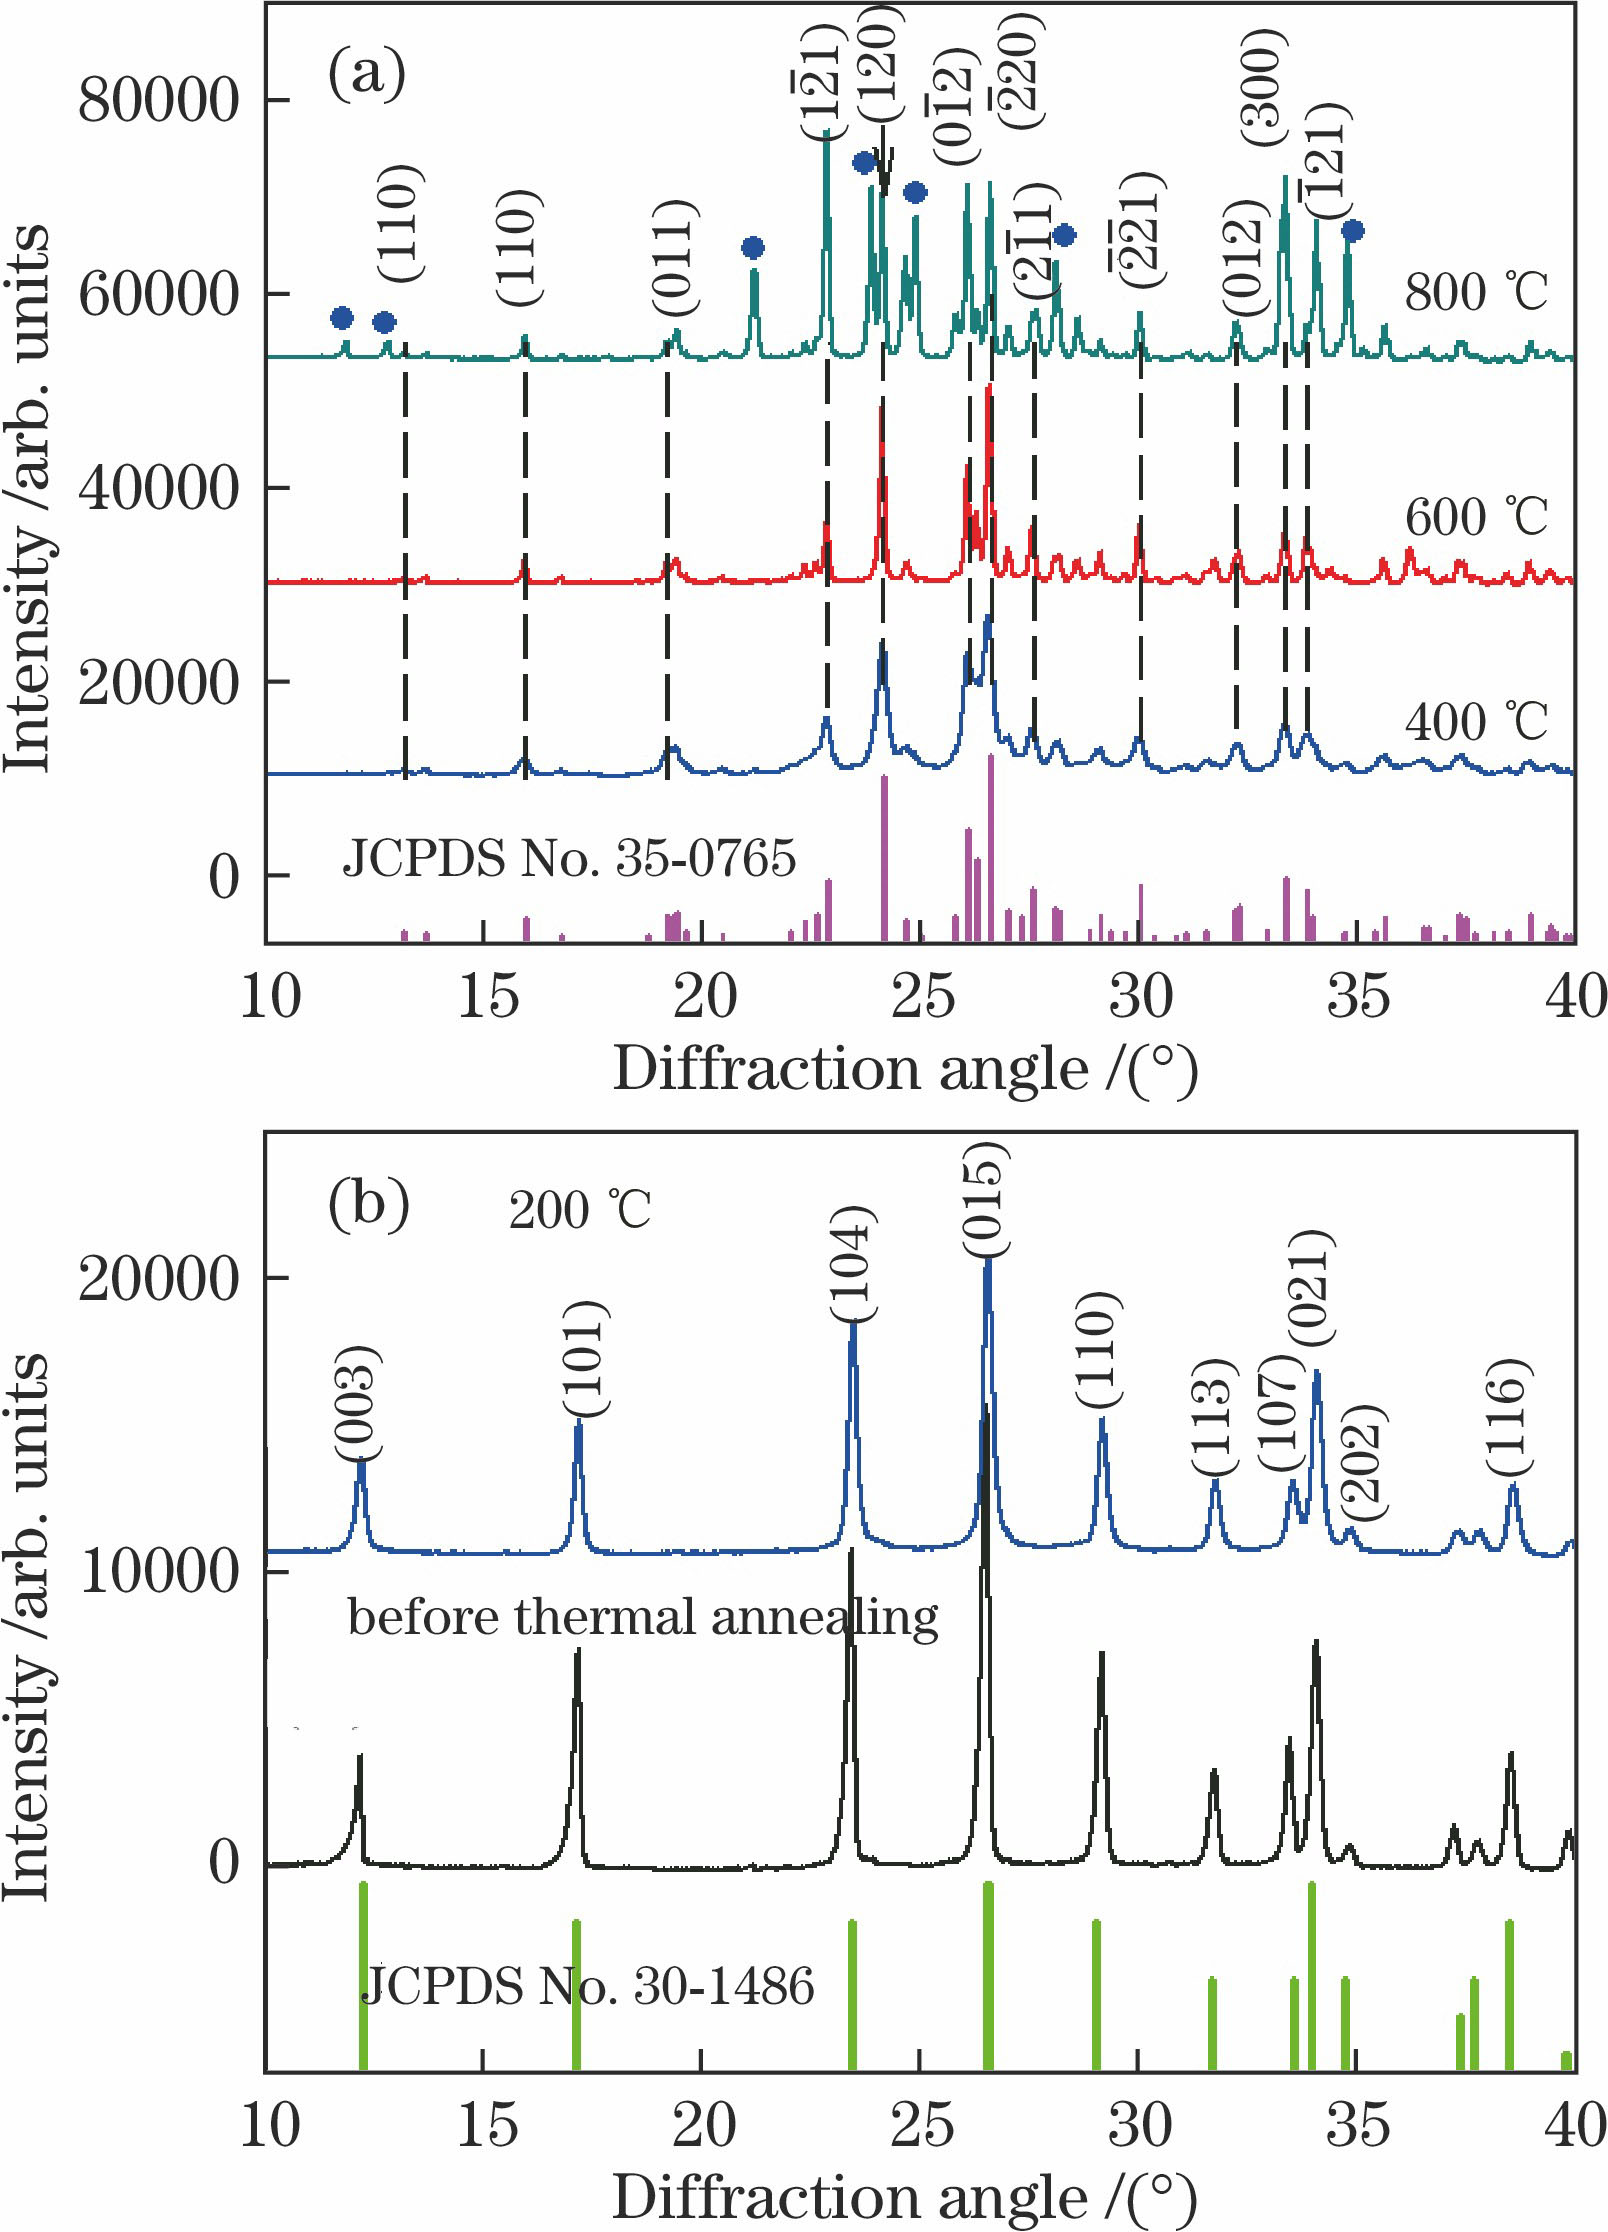 XRD spectra of Eu3+-doped ZMO. (a) Thermal annealing treatments at different temperatures; (b) comparison between spectra before thermal annealing and after thermal annealing of 2 h at 200 ℃ temperature